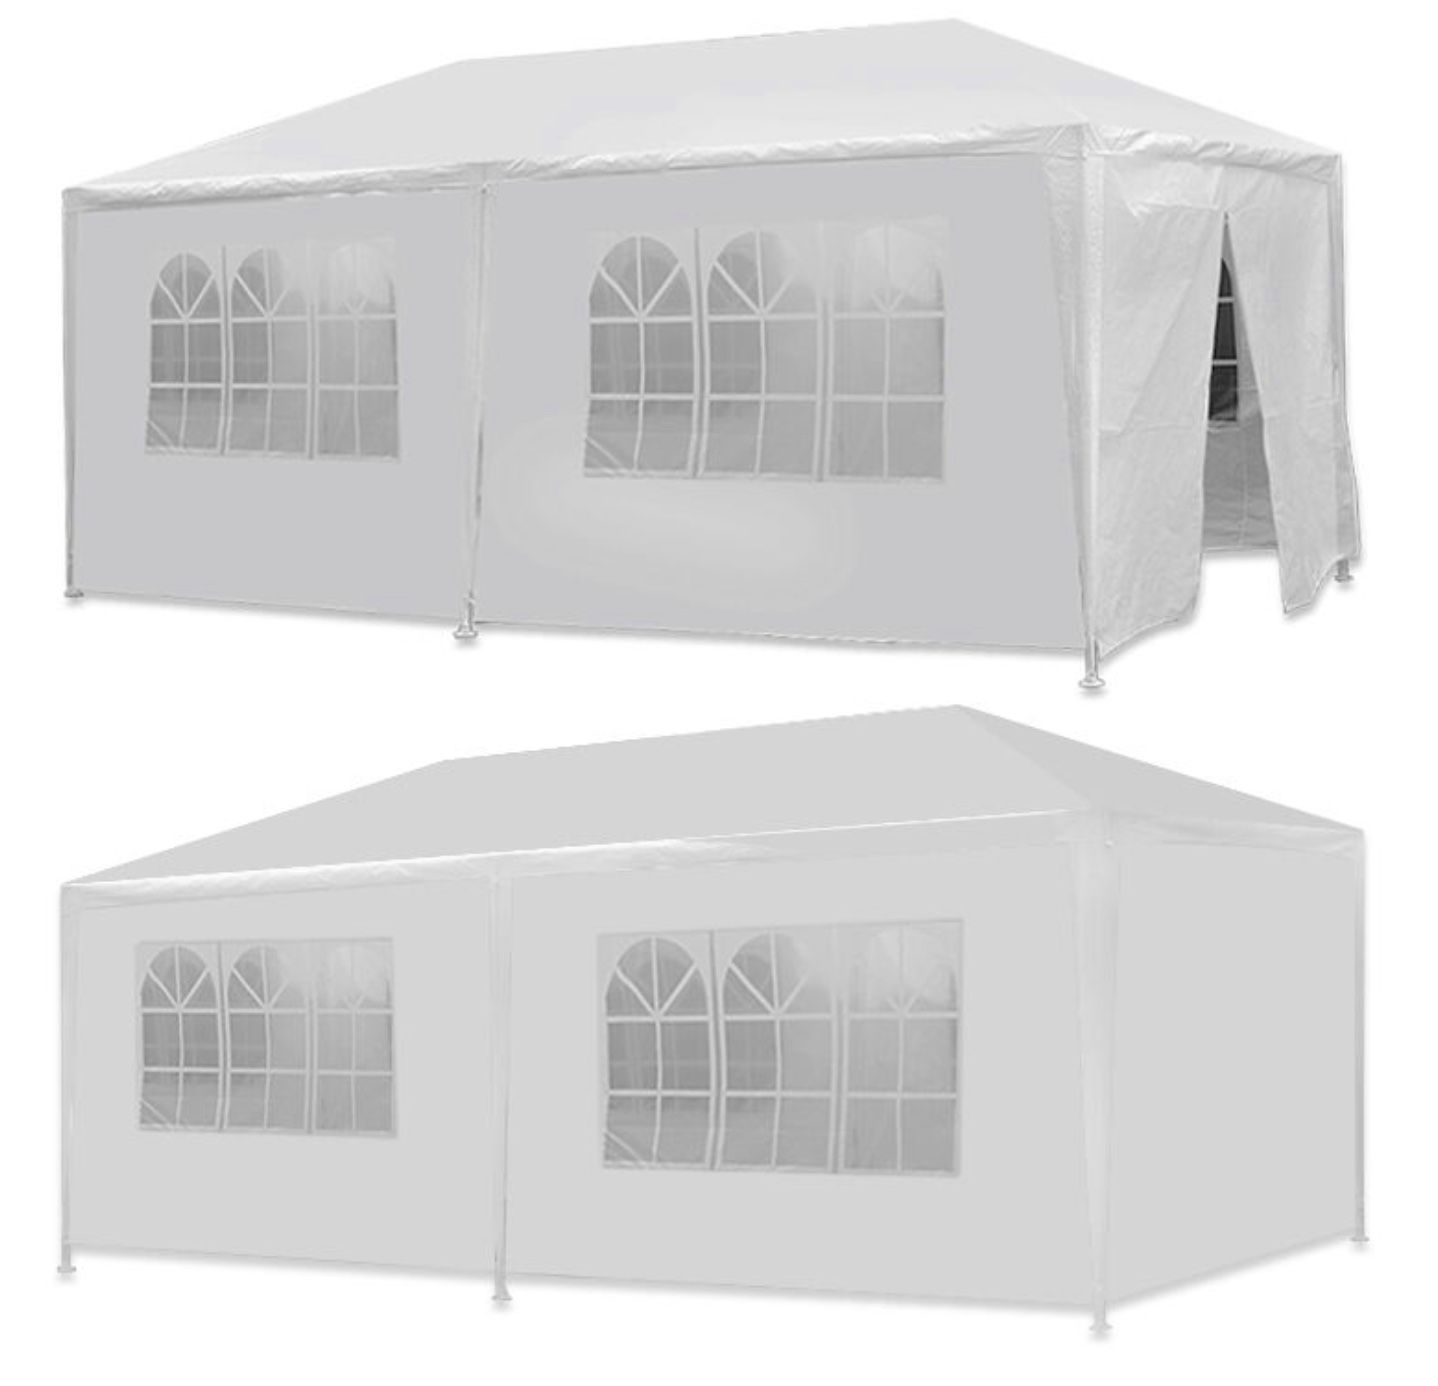 💯✅🔥New 10 x 20' Outdoor Gazebo Party Tent w/ 6 Side Walls Wedding Canopy Cater Events